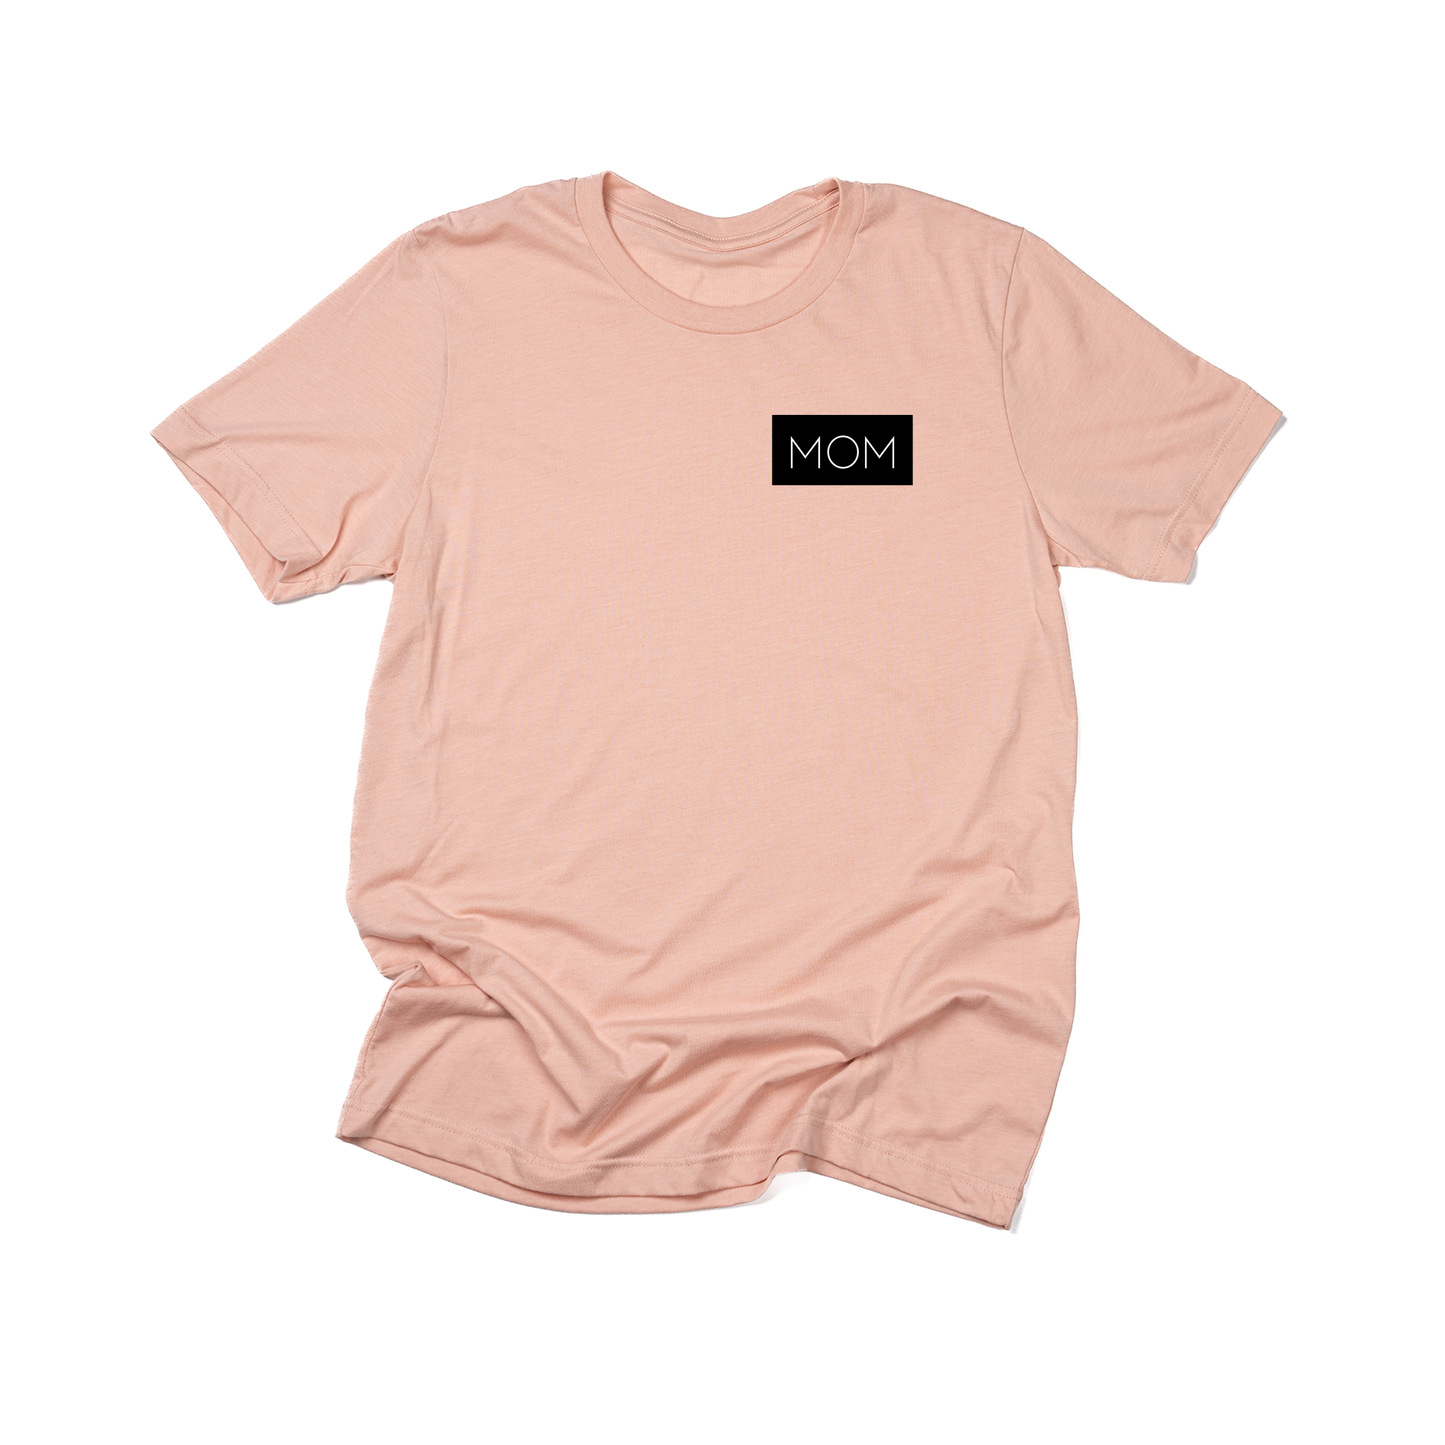 Mom (Boxed Collection, Pocket, Black Box/White Text) - Tee (Peach)